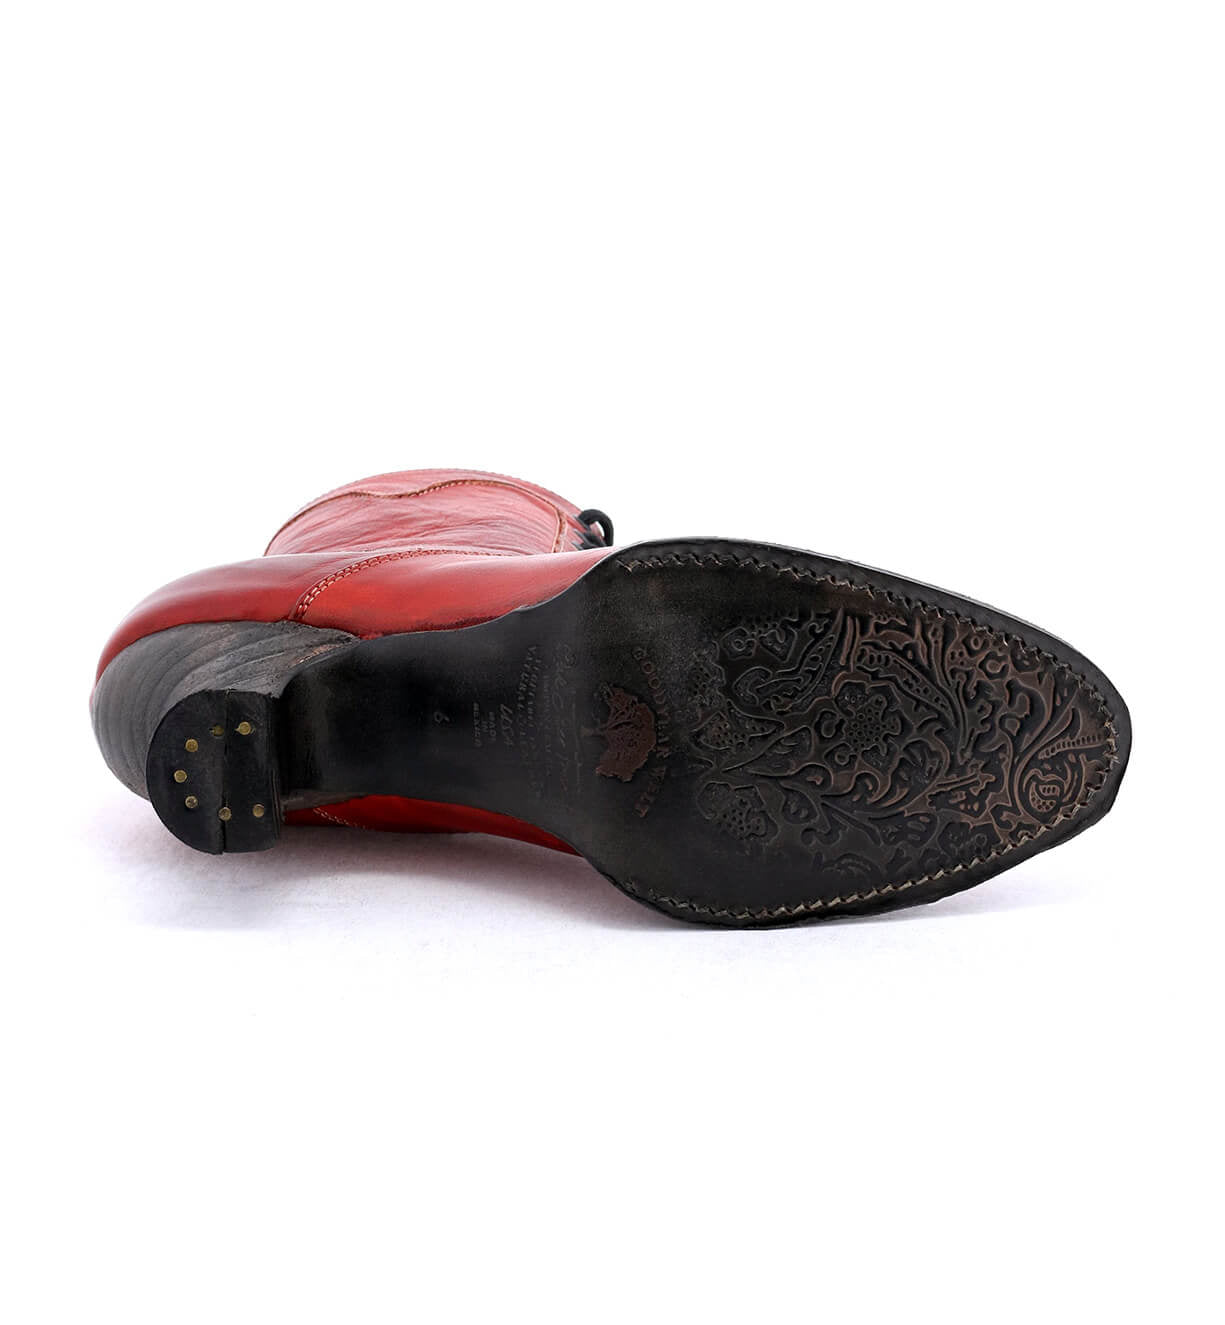 An Eleanor shoe from Oak Tree Farms, a Victorian-style red leather shoe with black detailing, exhibiting uncompromising quality in its hand-dyed craftsmanship.